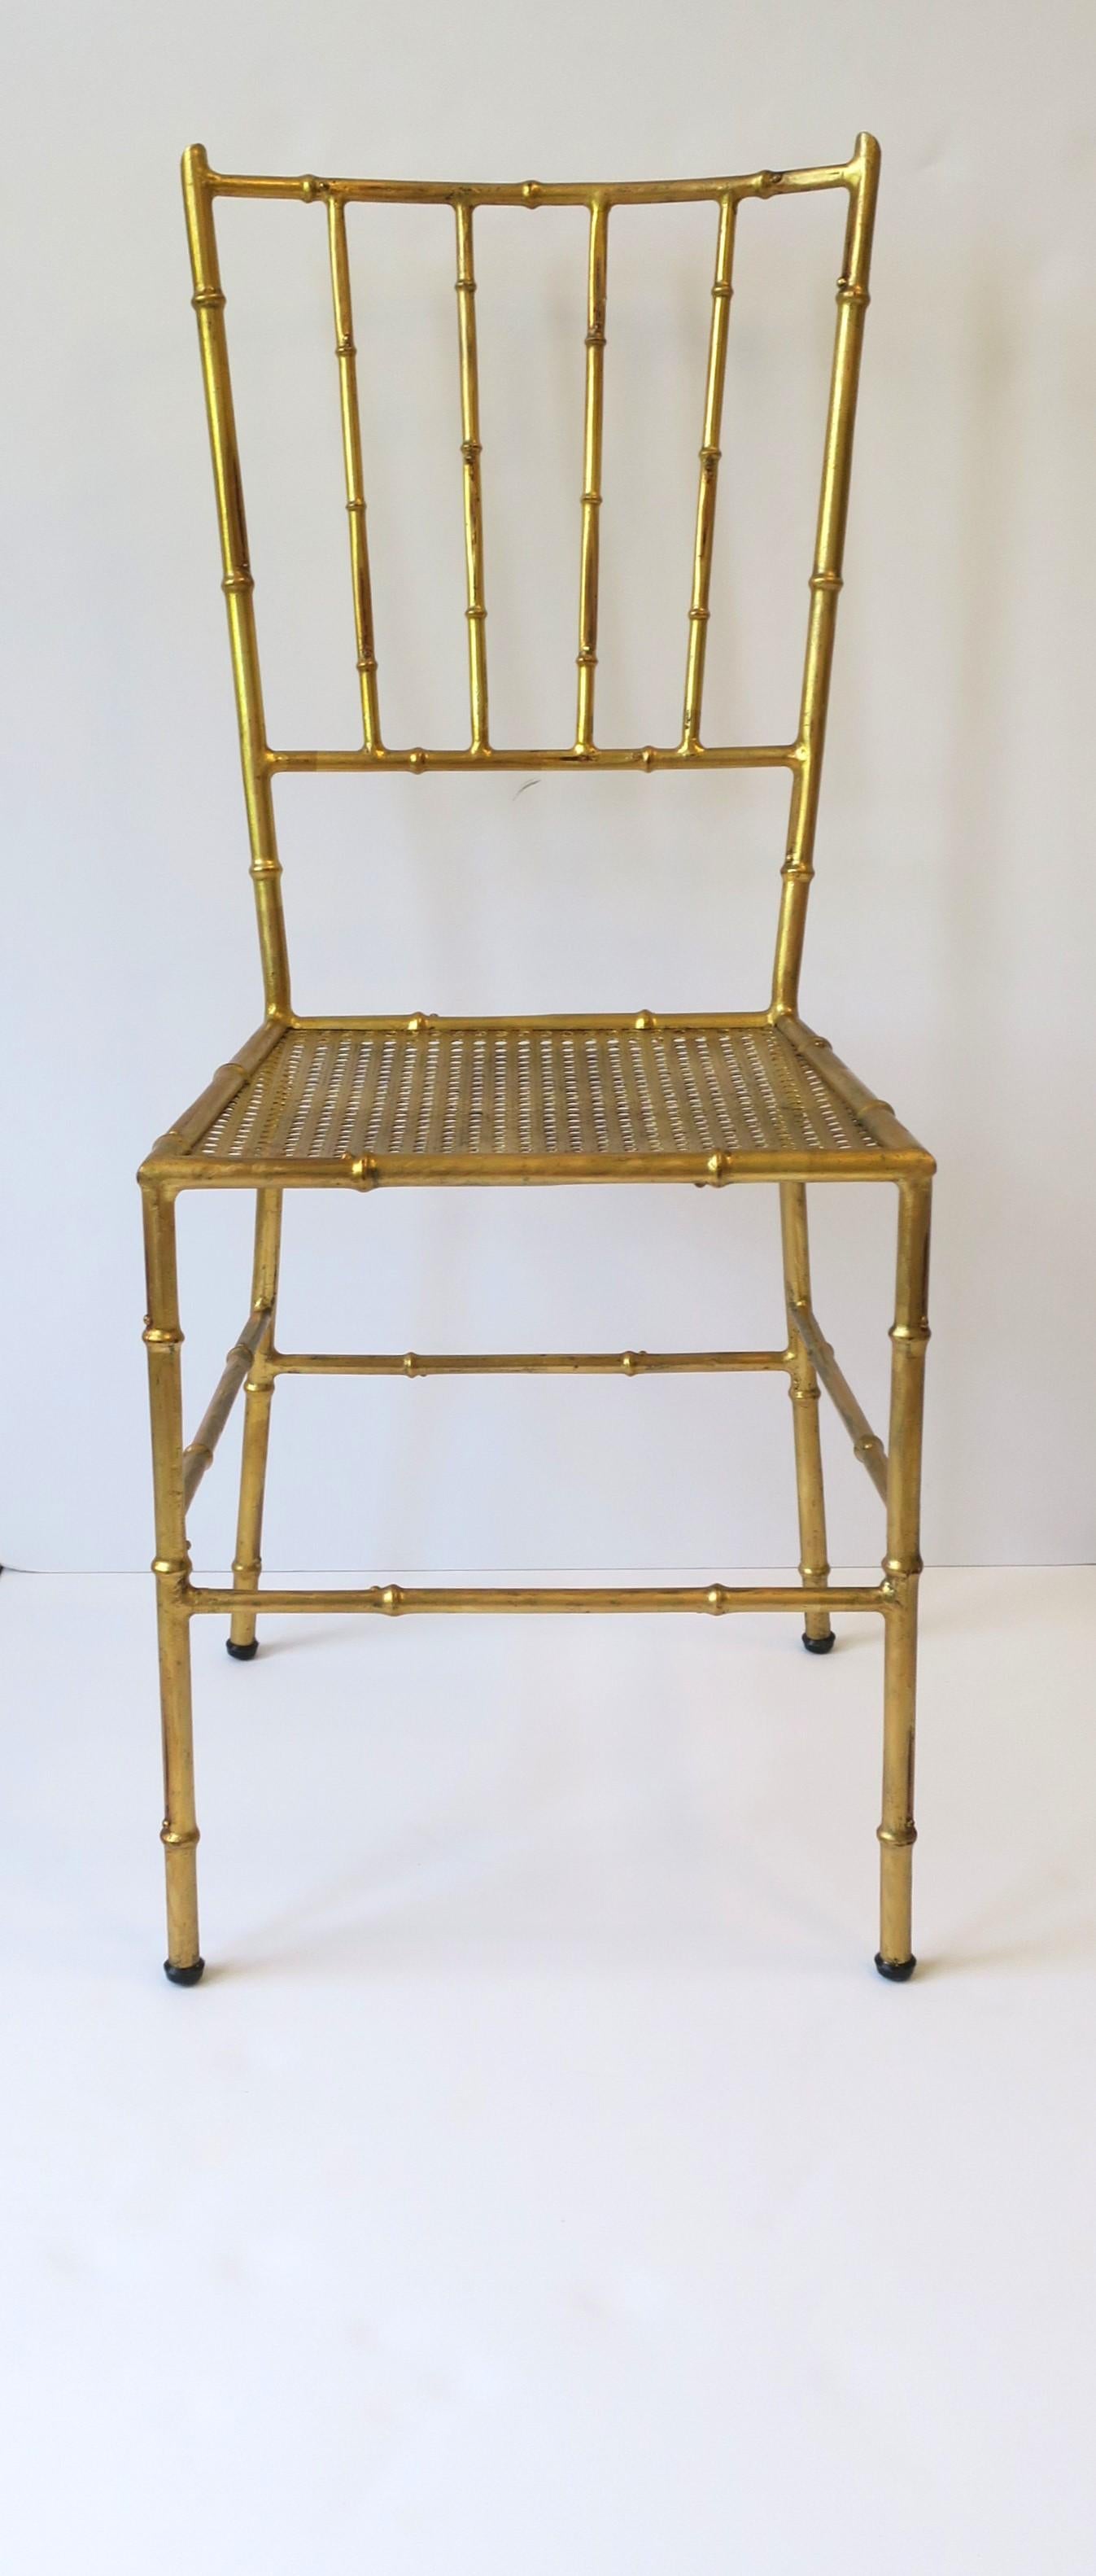 Gilt Italian Gold Metal Cane and Bamboo-Esque Desk, Dining or Side Chair For Sale